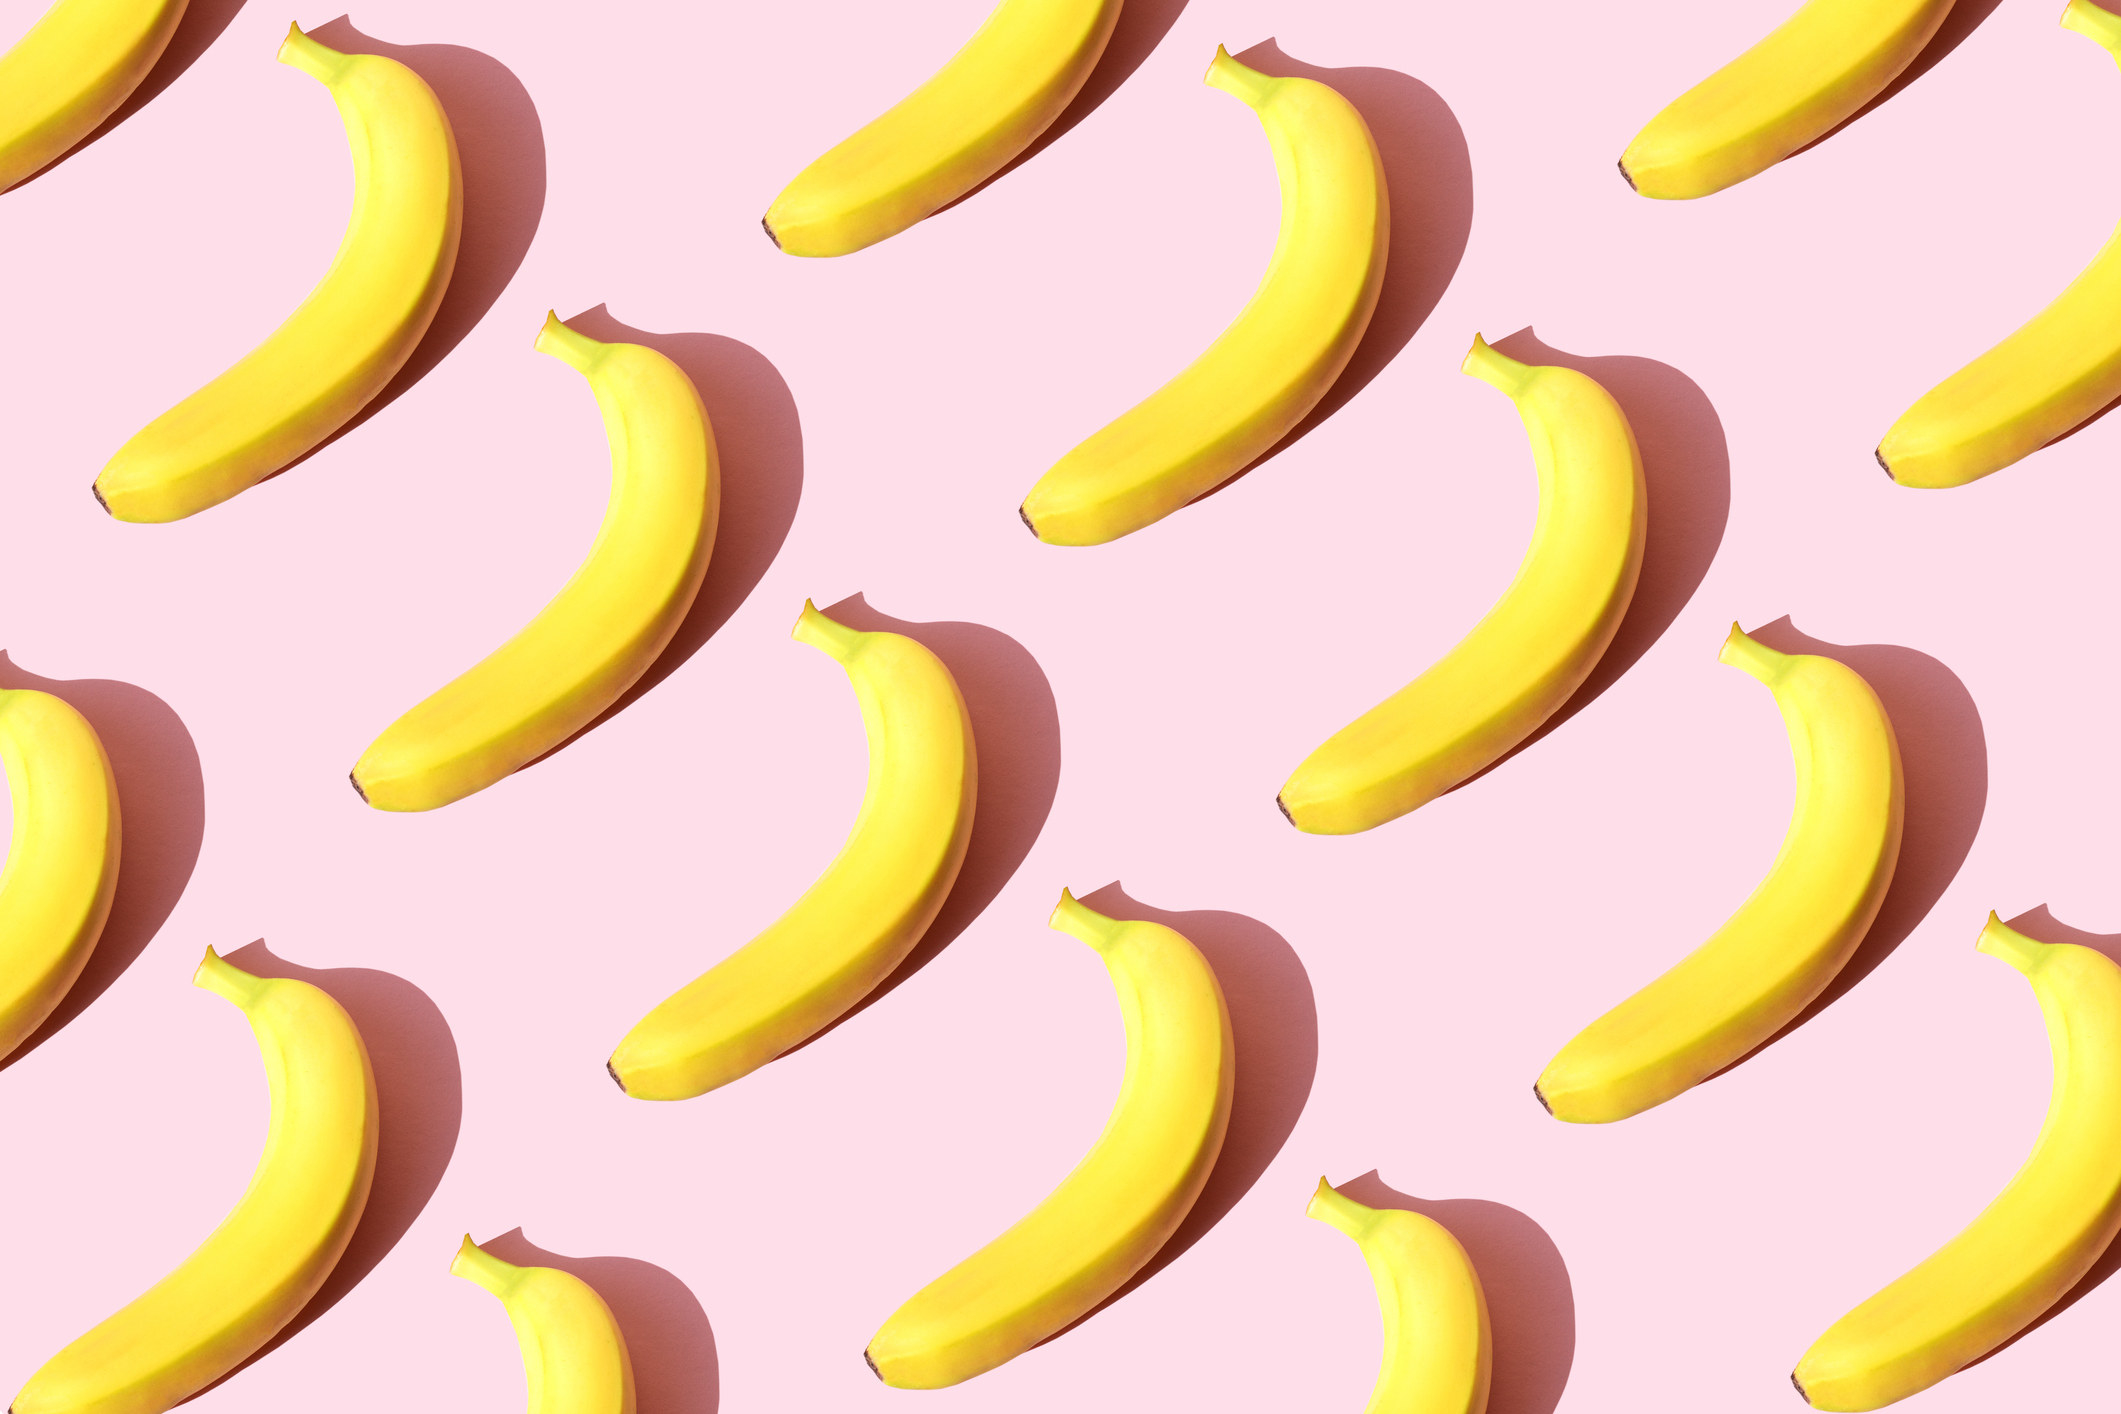 Several bananas arranged neatly in rows on a solid background